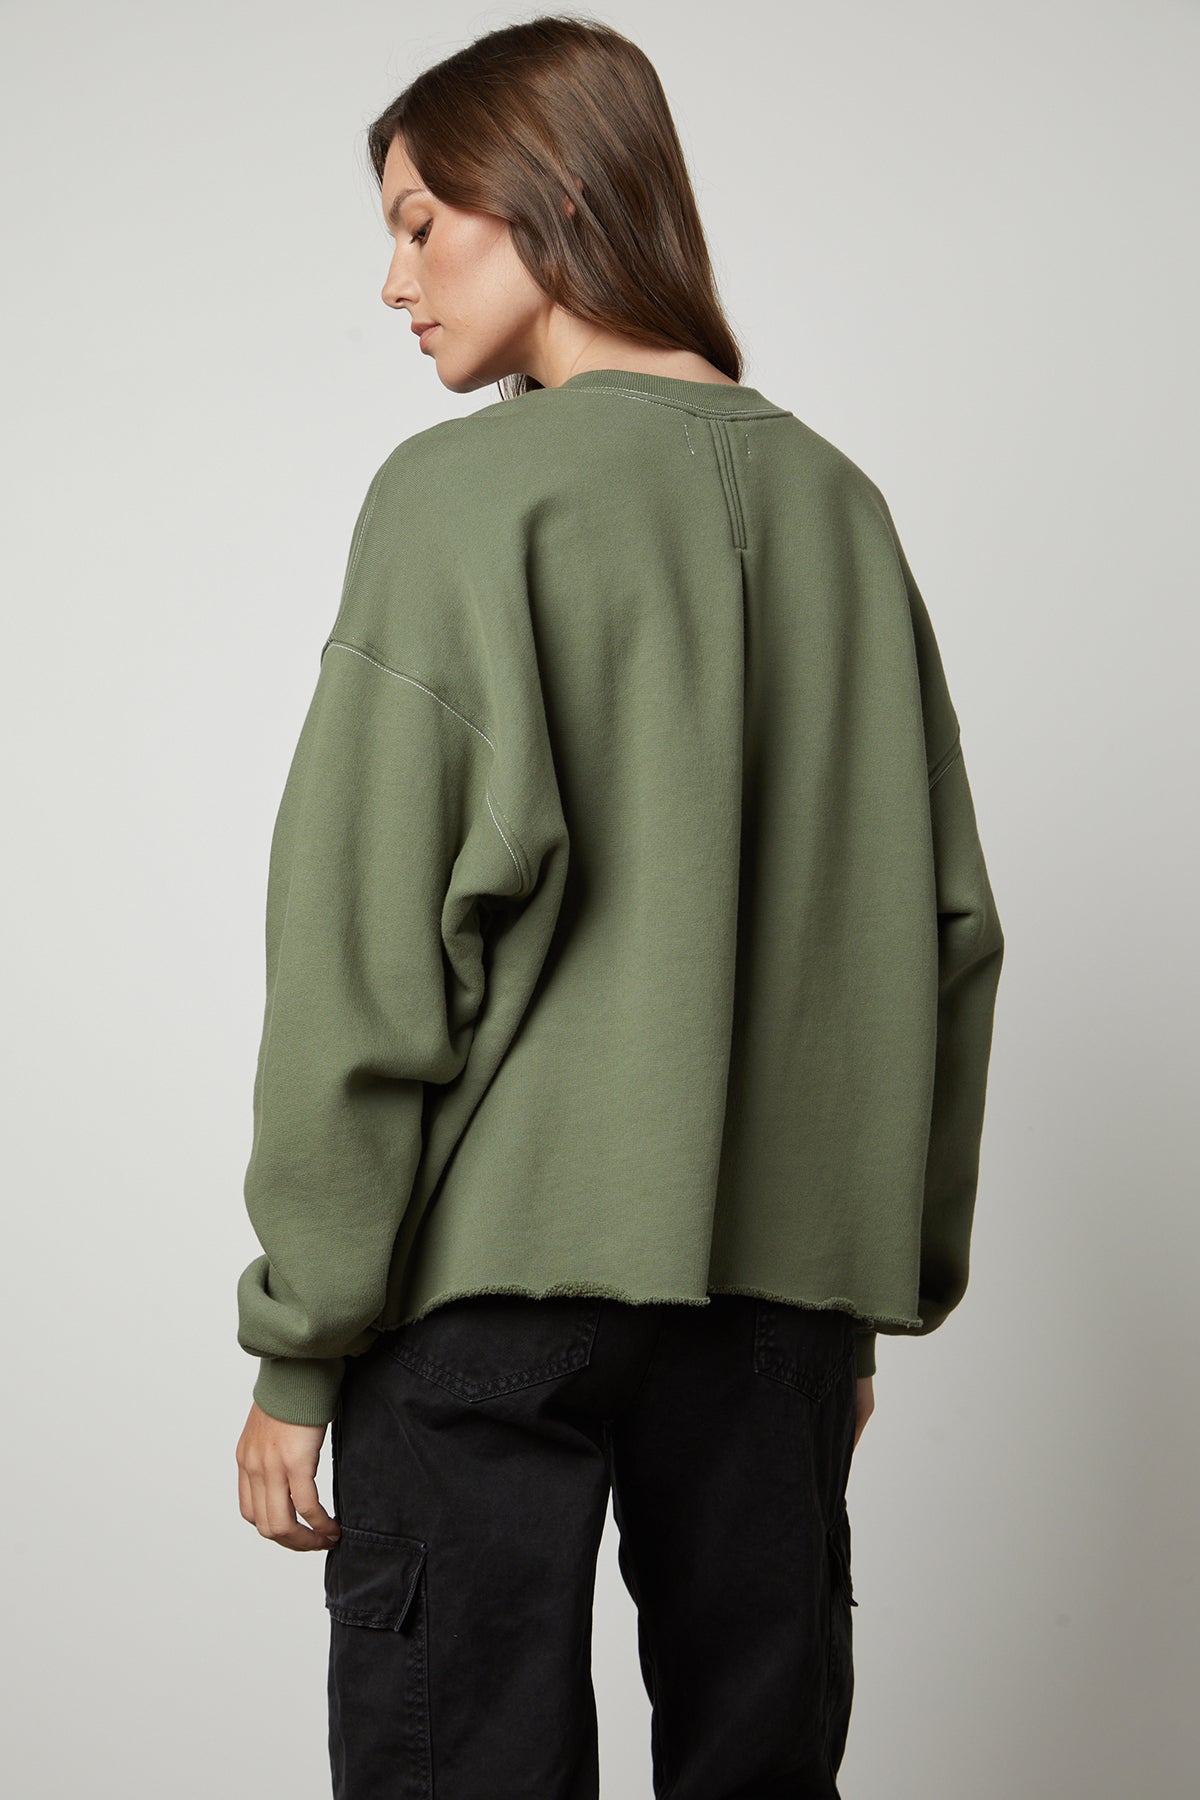 The back view of a woman wearing the Velvet by Graham & Spencer DAX OVERSIZED SWEATSHIRT made of cotton fleece.-35503748939969